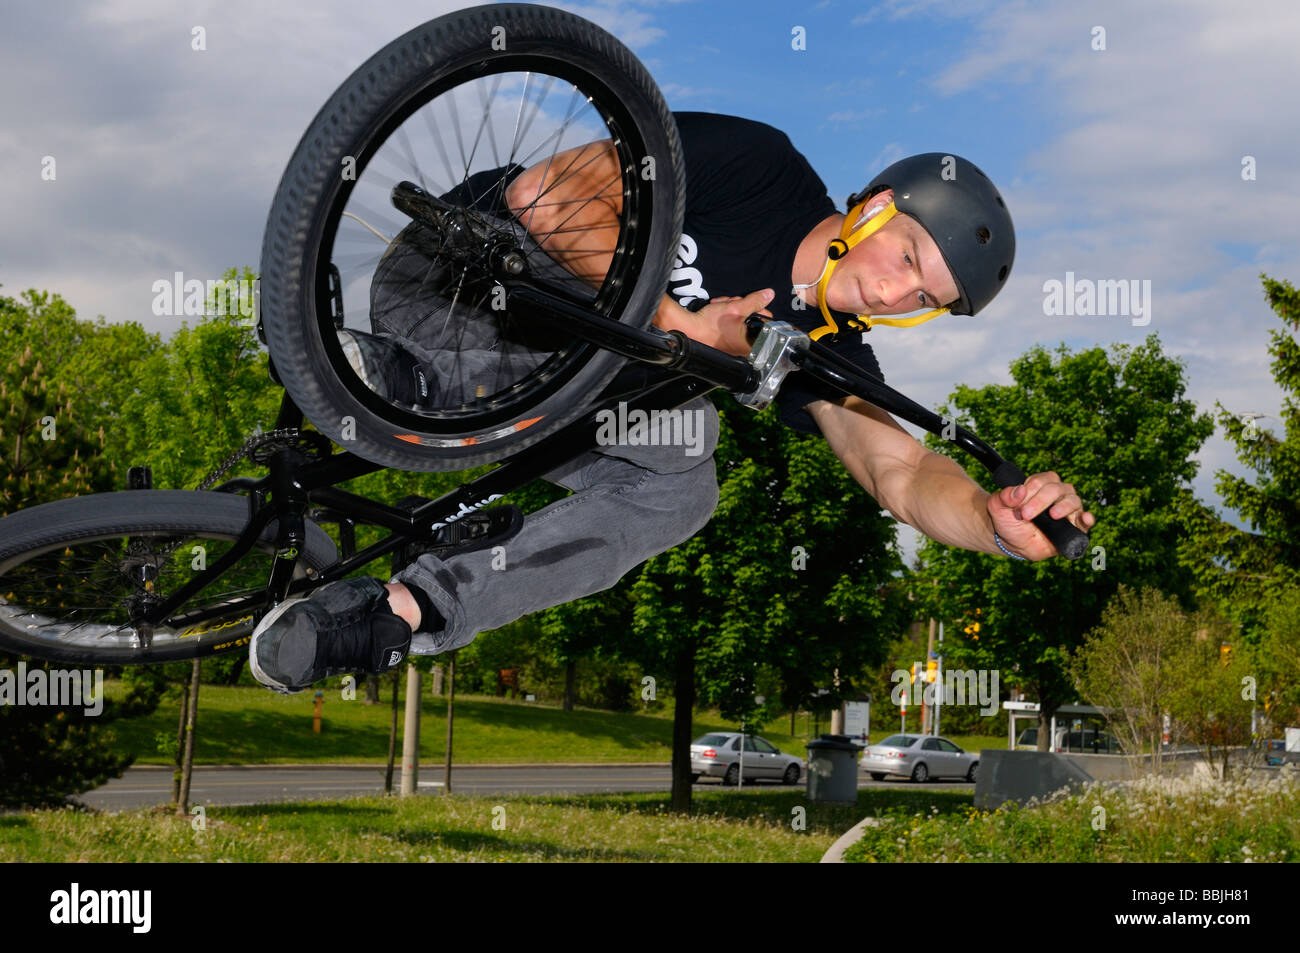 Airborne urban BMX bike rider in an Air Out Tabletop over local traffic at a Toronto city skatepark Stock Photo